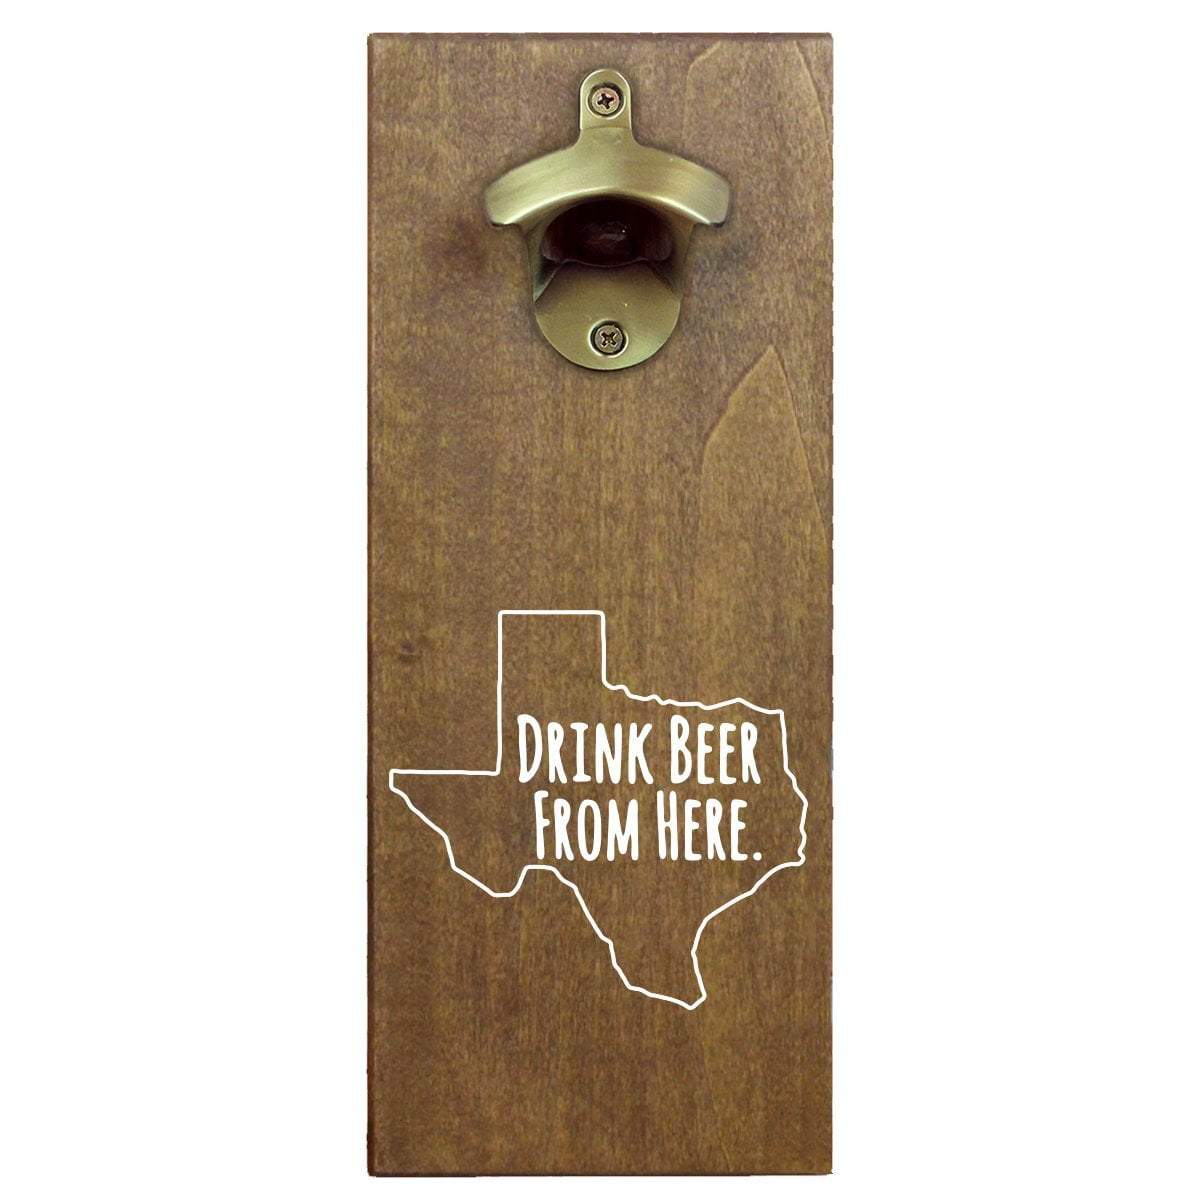 WALL-MOUNTED BOTTLE OPENERS - DRINK BEER FROM HERE